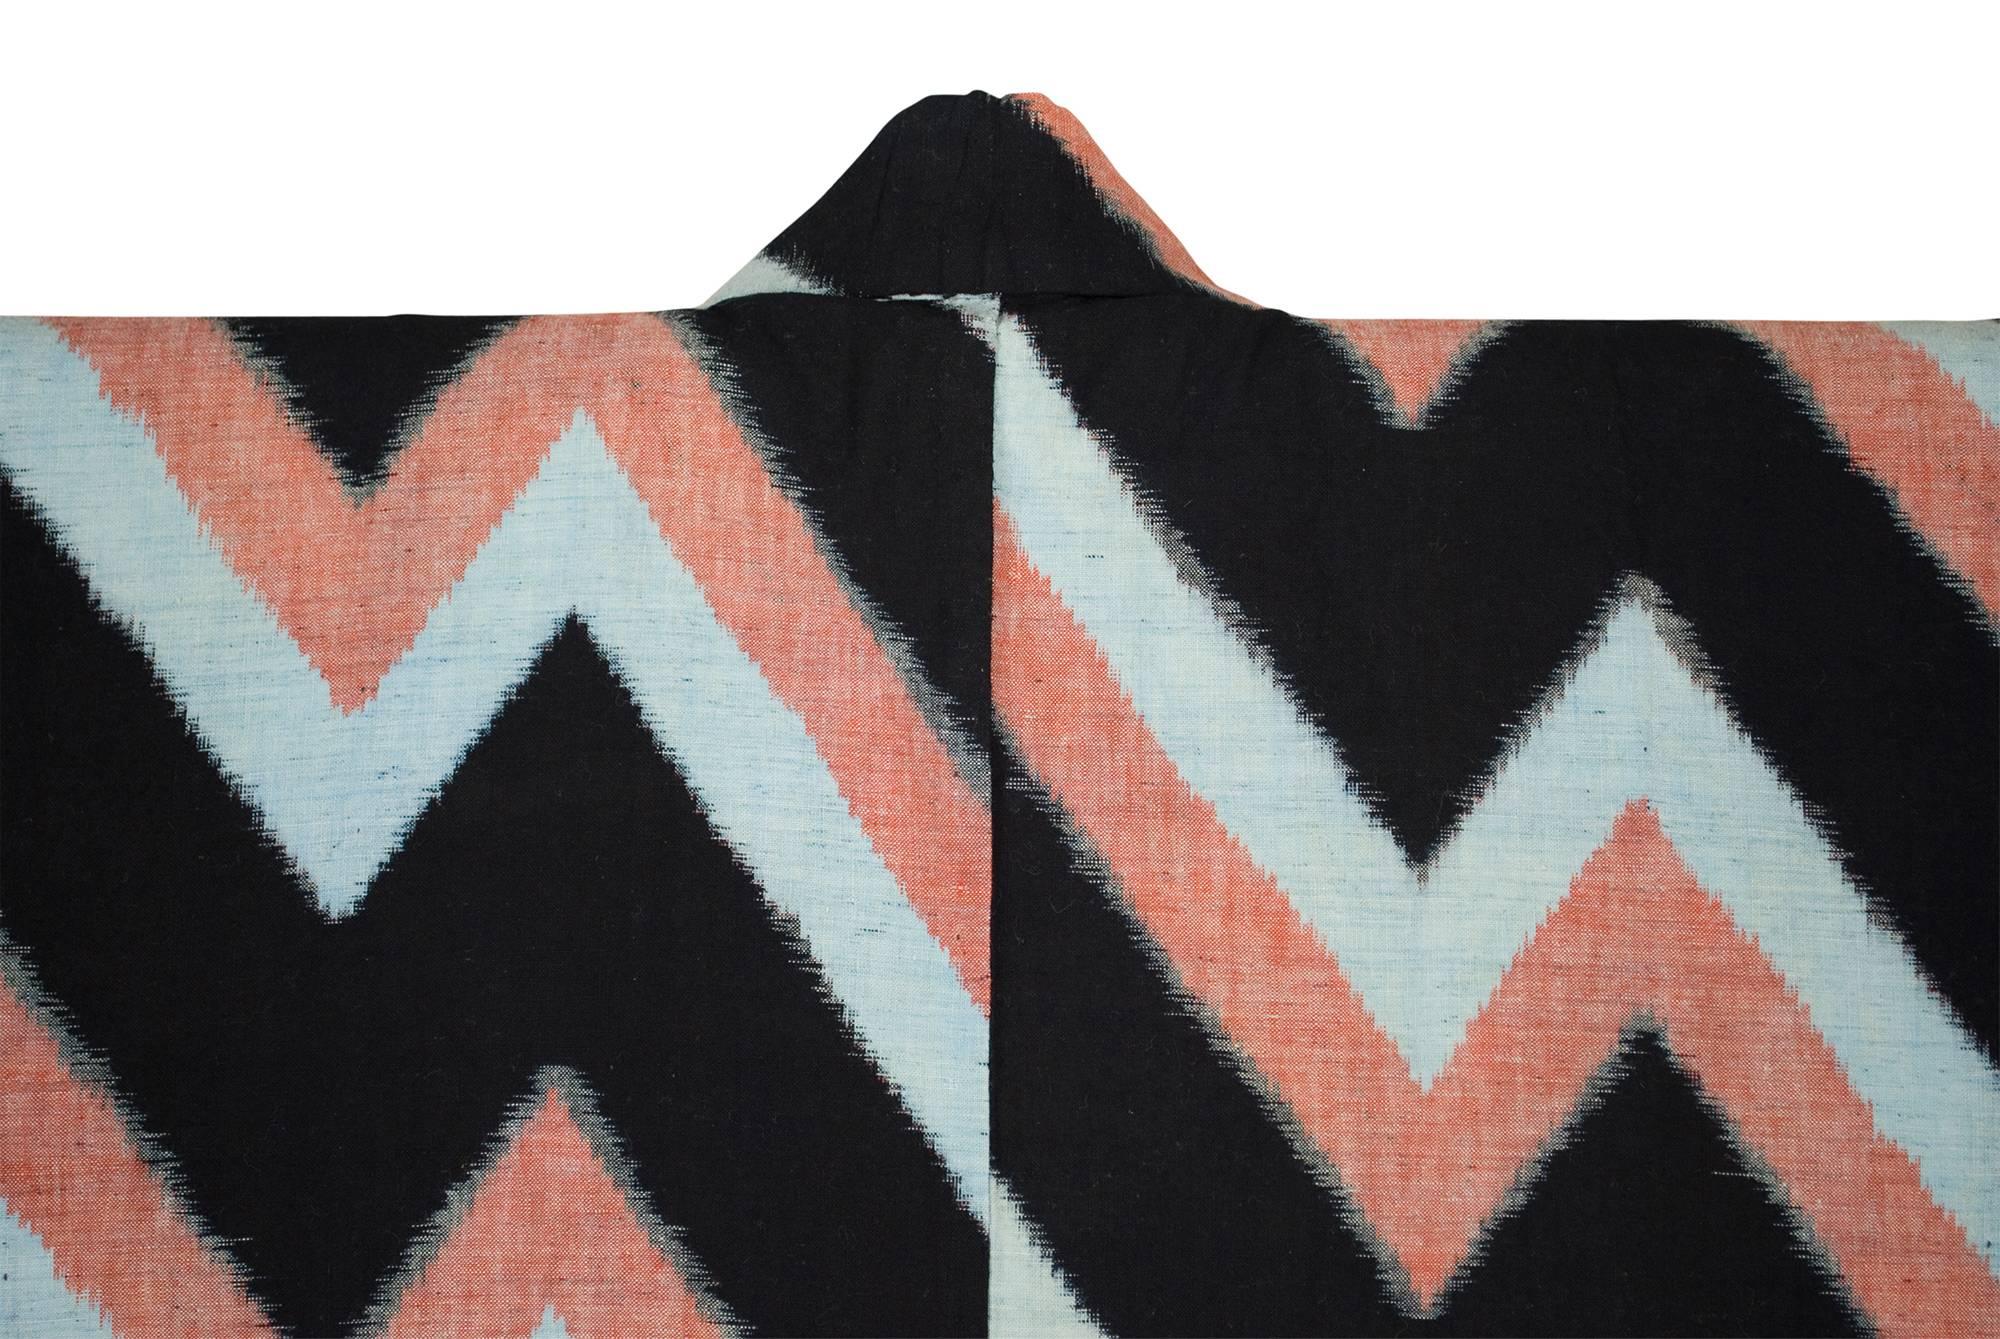 Cotton double ikat kimono, Japan, Early 20th Century

A graphically compelling example of a Bingo-gasuri kimono, produced in Hiroshima Prefecture, Japan.  Its lightening bolt design the result of both warp and weft ikat patterning. 